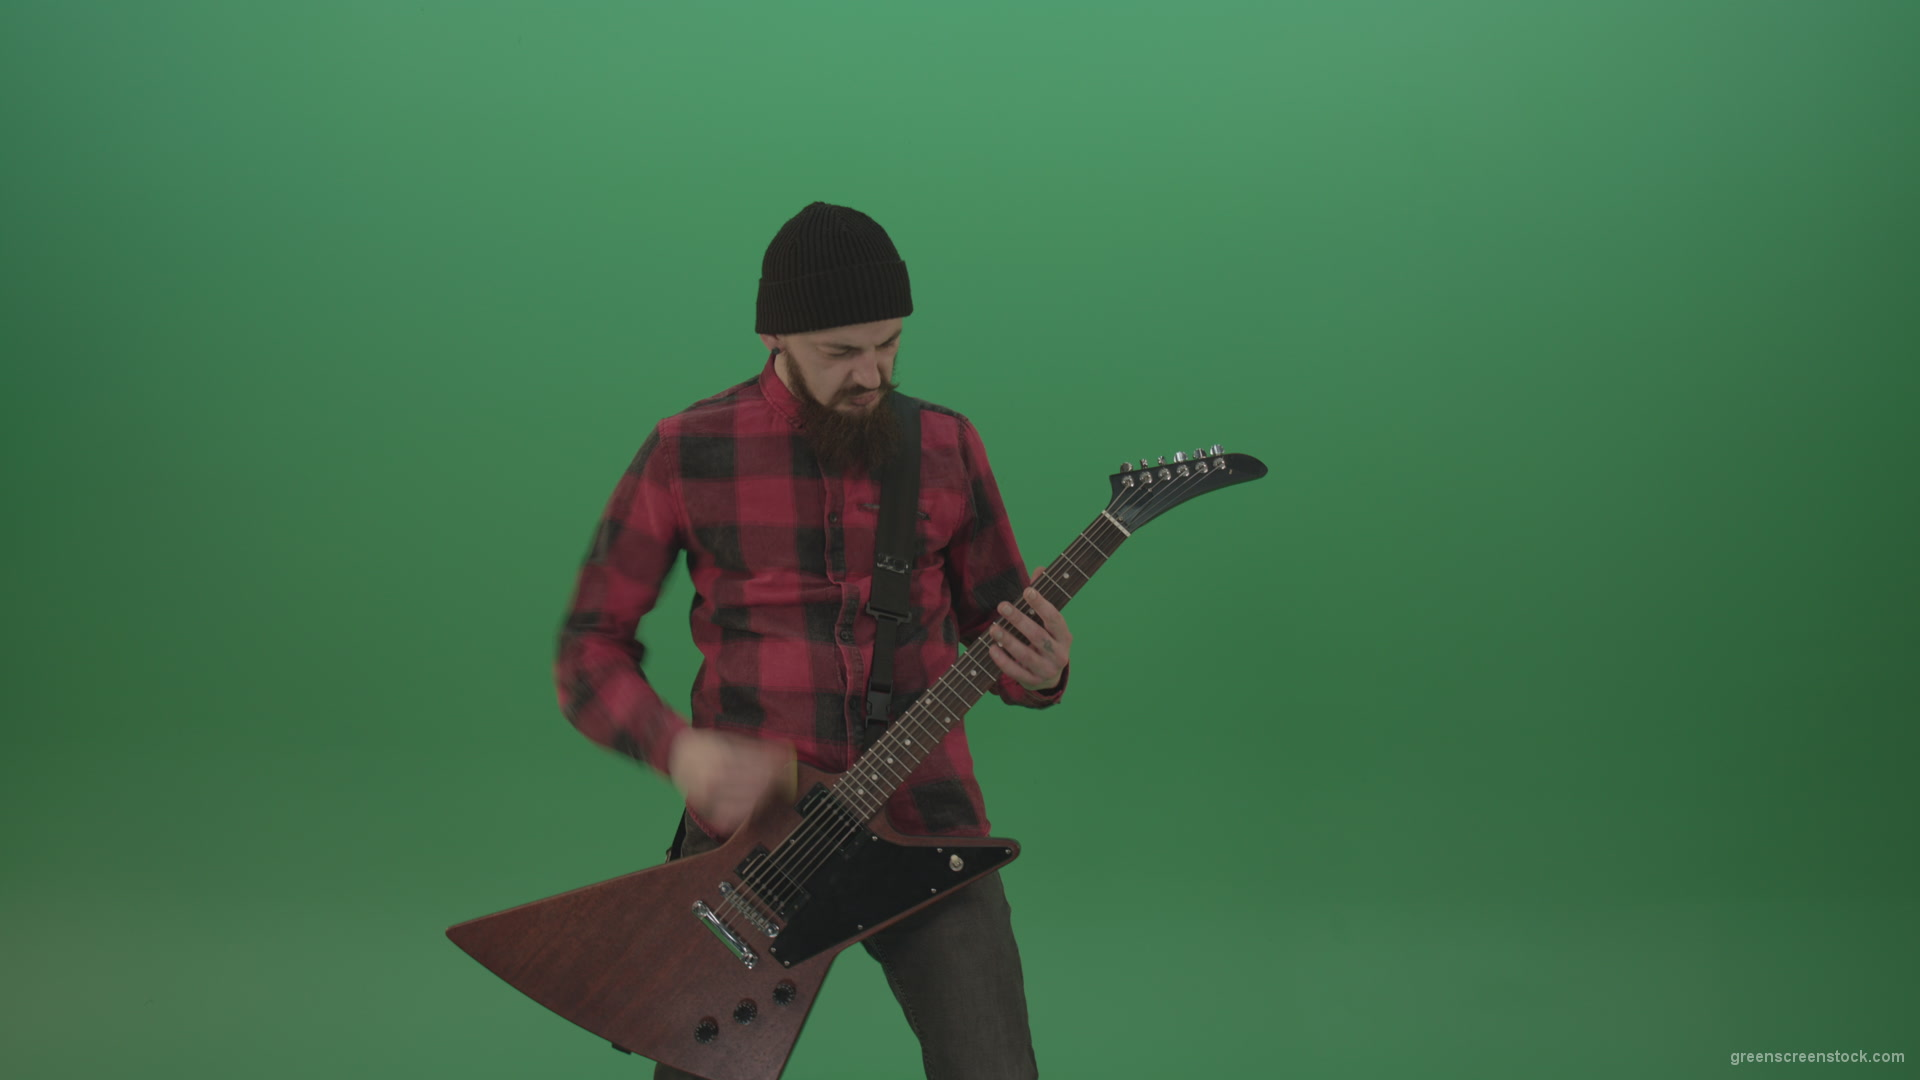 Old-man-with-beard-play-rock-guitar-isolated-on-green-screen-background-4K_007 Green Screen Stock